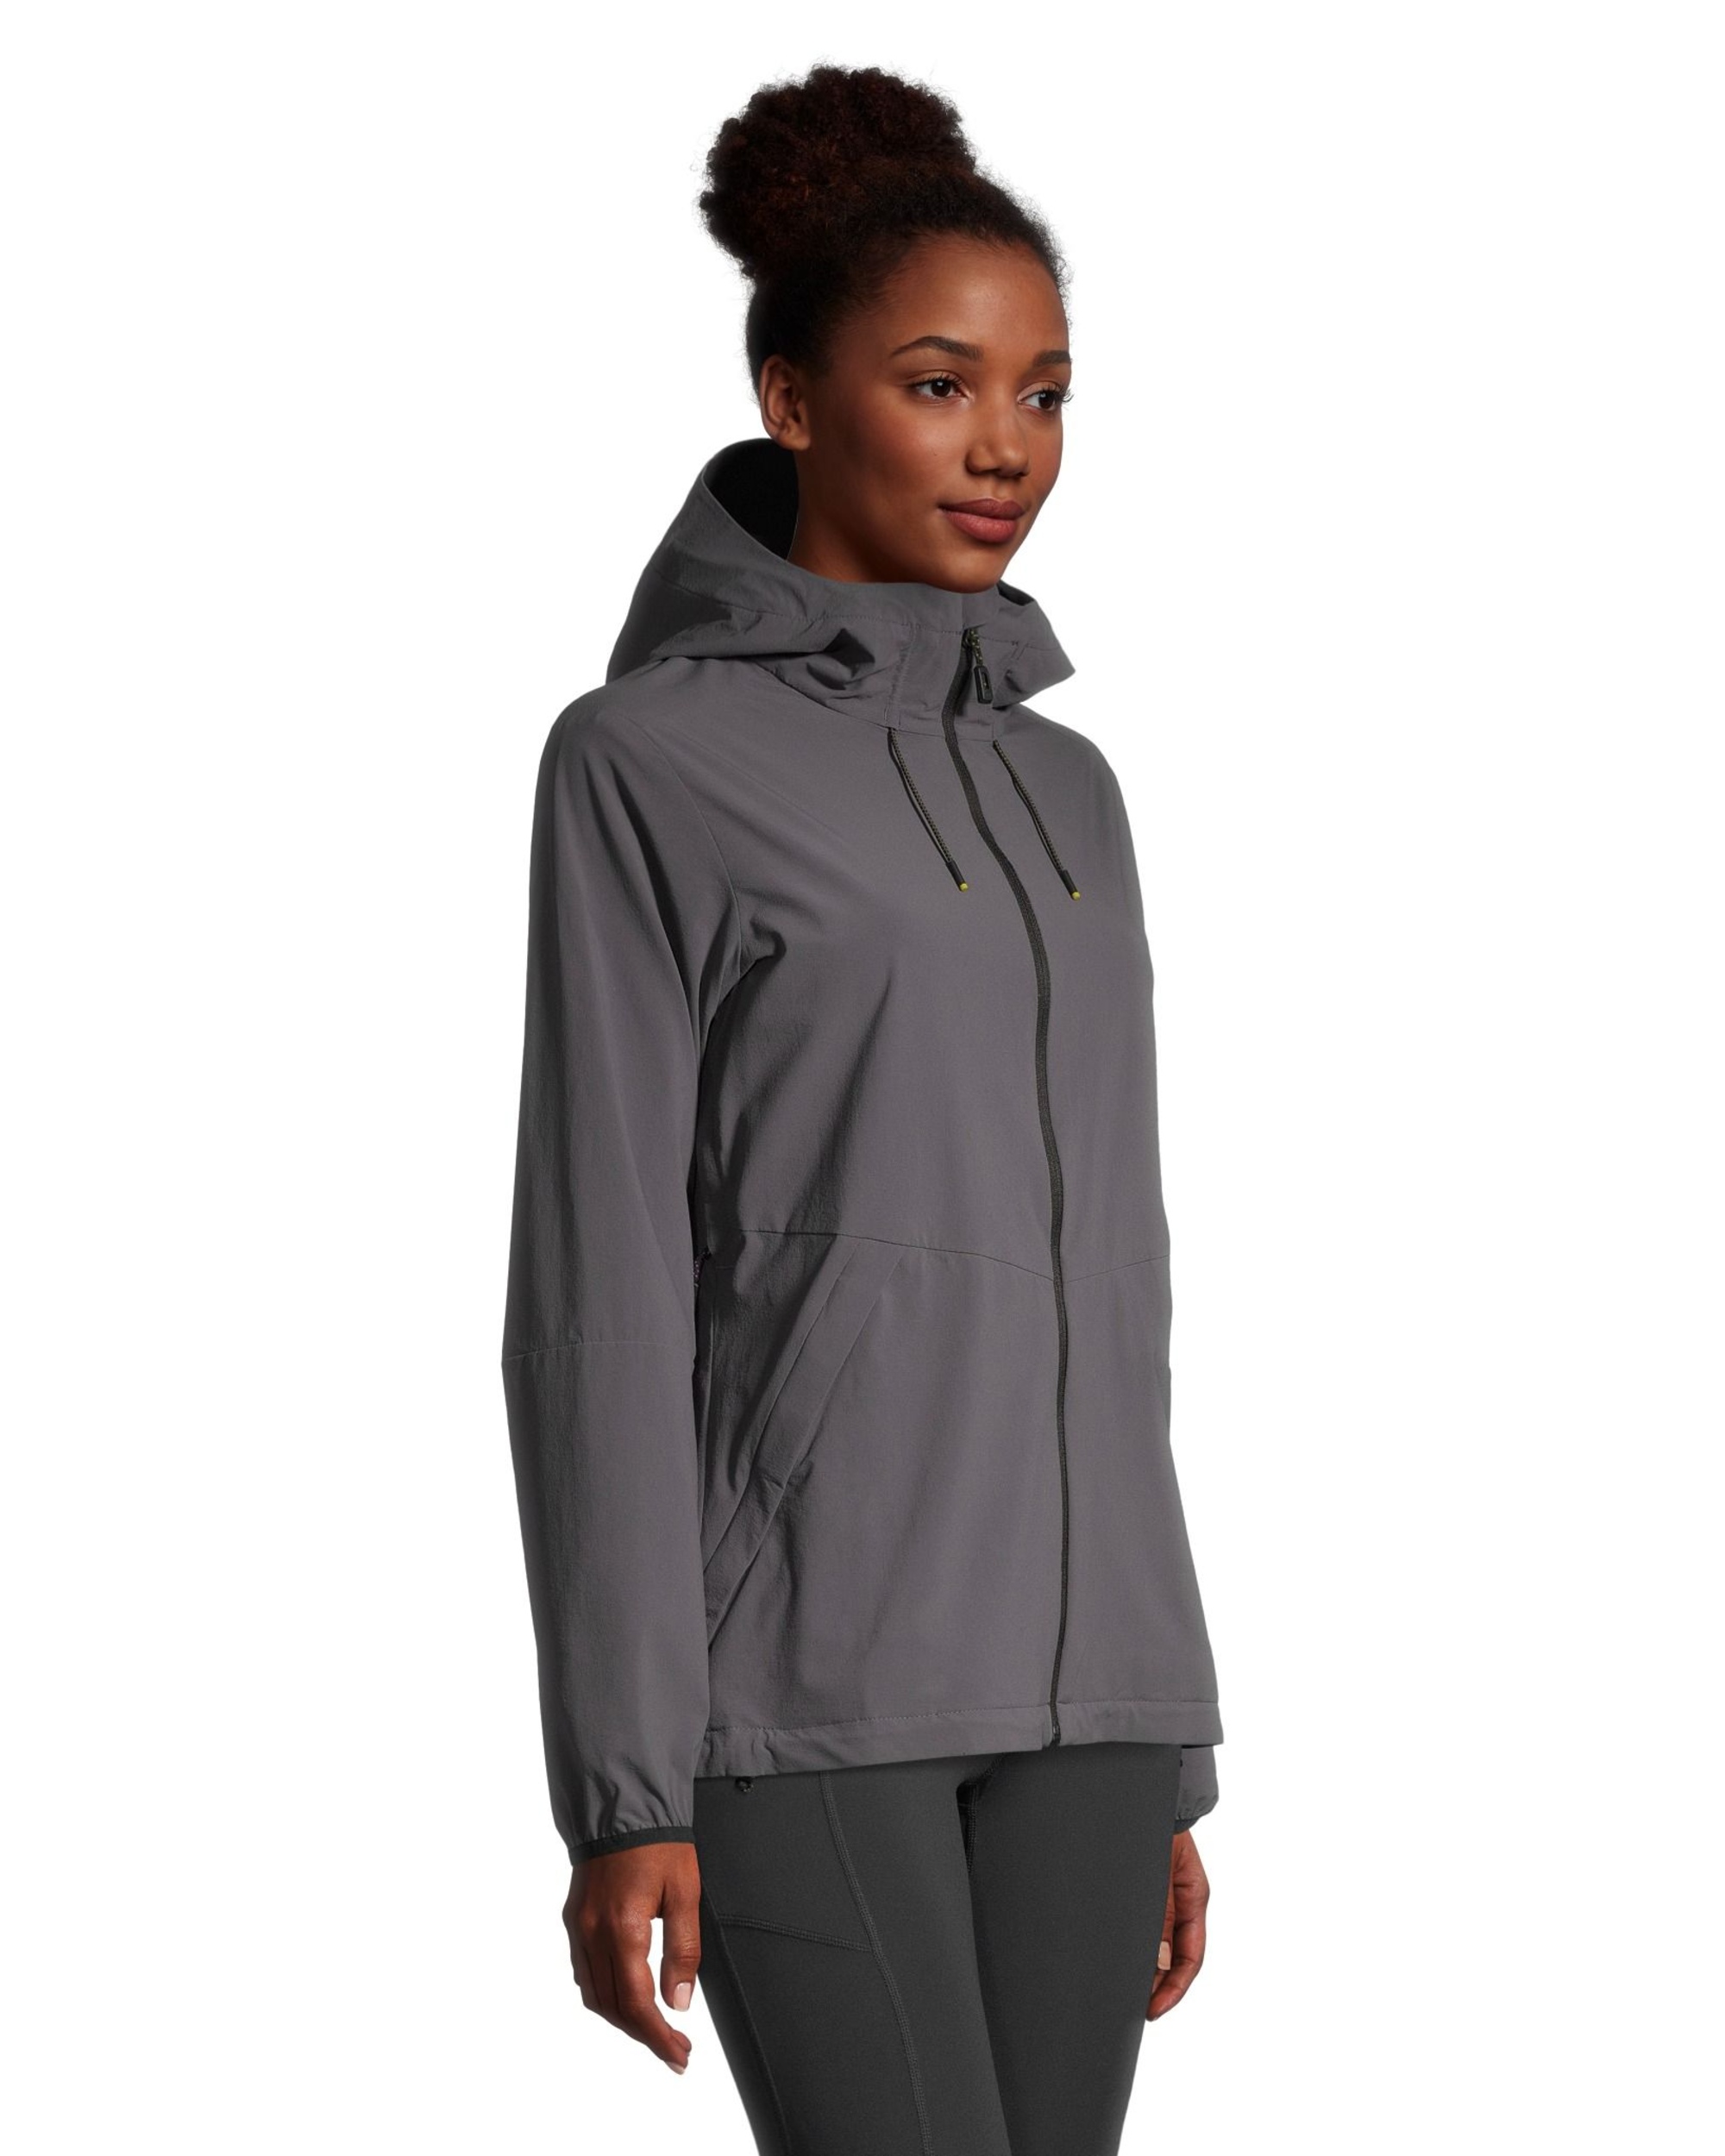 WindRiver Women's Tick and Mosquito Repellent Jacket | Marks